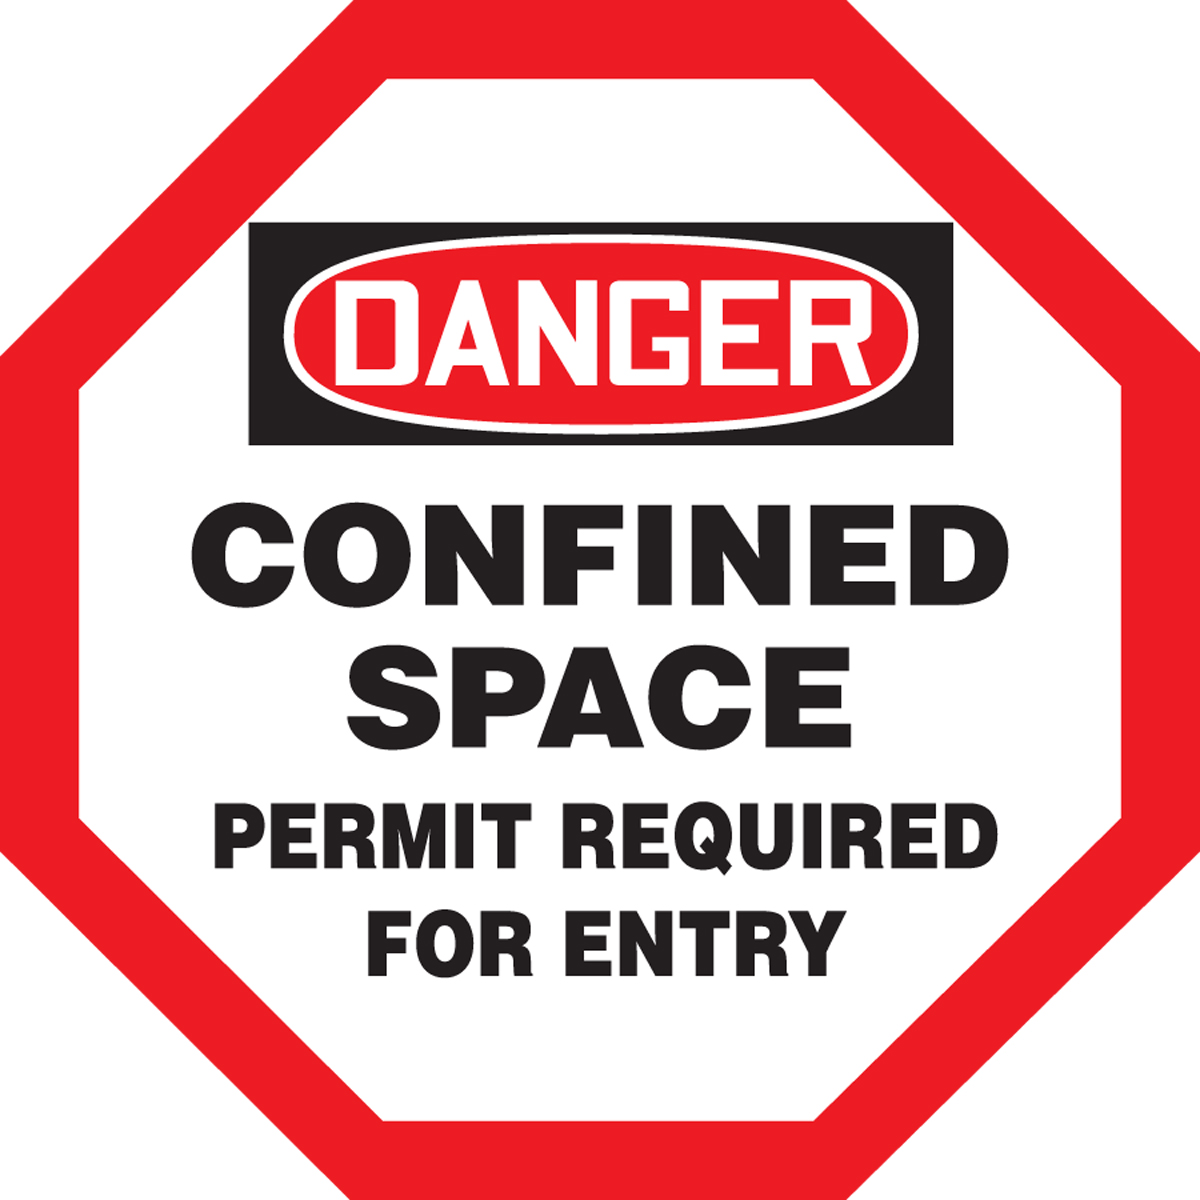 CONFINED SPACE PERMIT REQUIRED FOR ENTRY